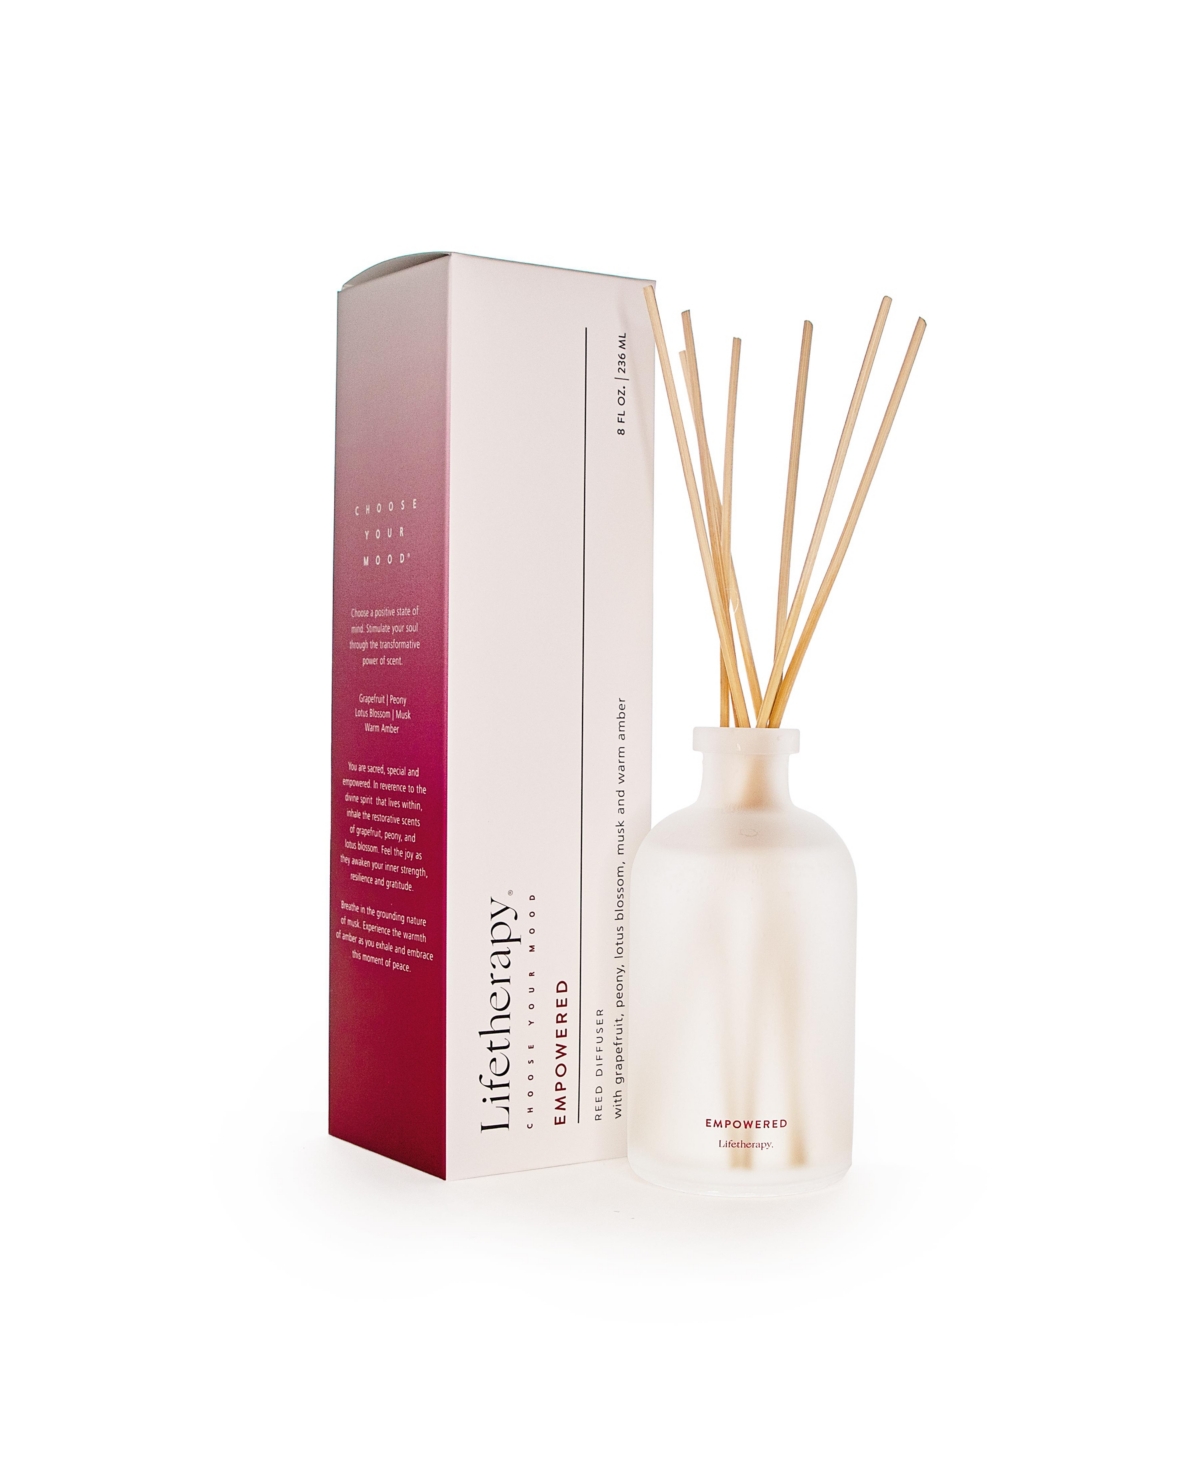 Lifetherapy Empowered Reed Diffuser, 8 oz.